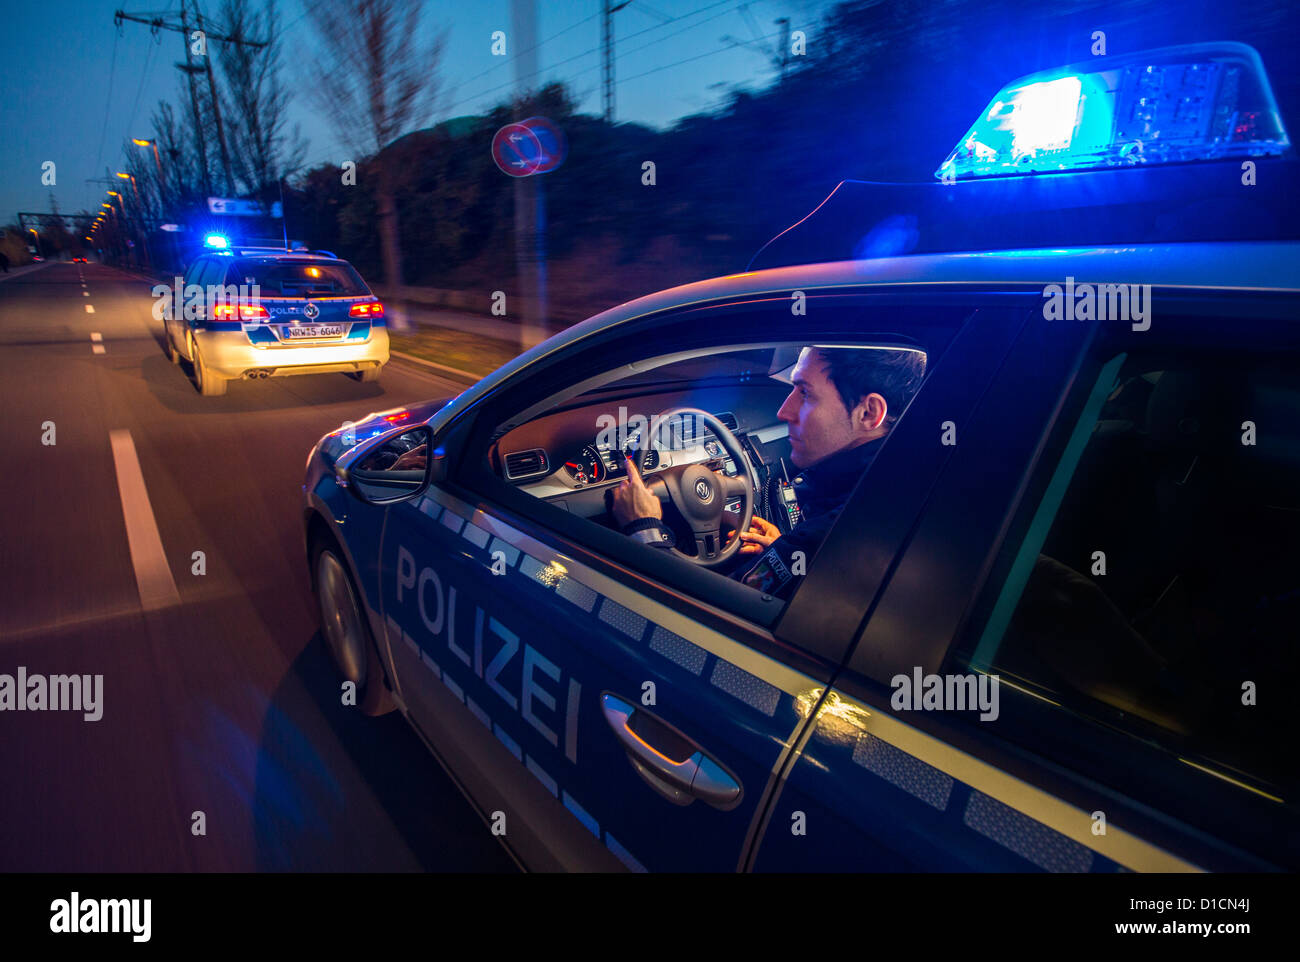 Police patrol car with blue flashing lights, signal horn, driving fast during an emergency mission. Stock Photo